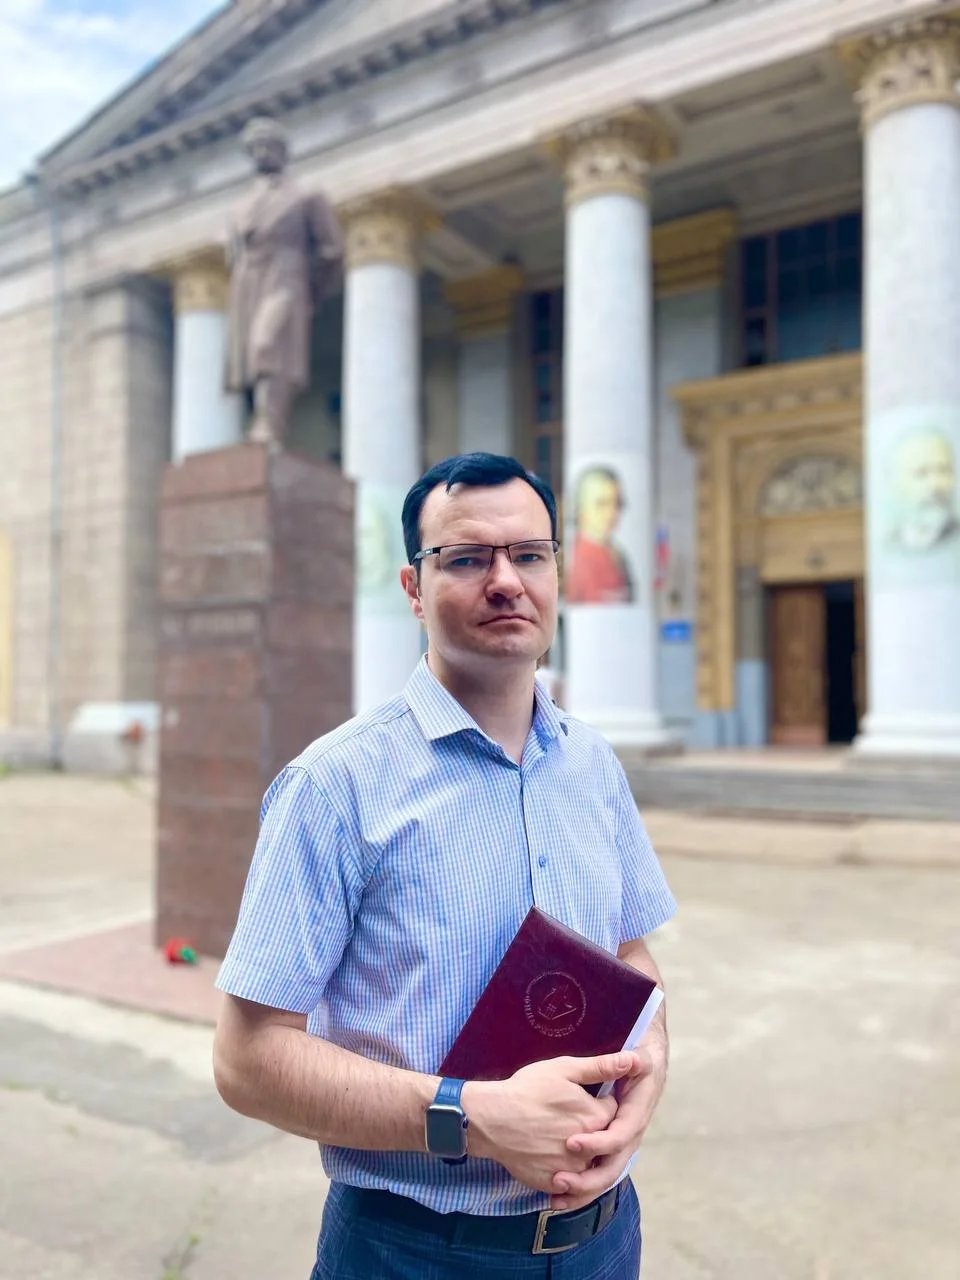 Alexander Paretsky pictured in front of the Mariupol Philharmonic Society on 28 June. Paretsky is facing the burnt down building on Metallurg street, which Matvey’s unit tried to secure. Photo:  Vkontakte